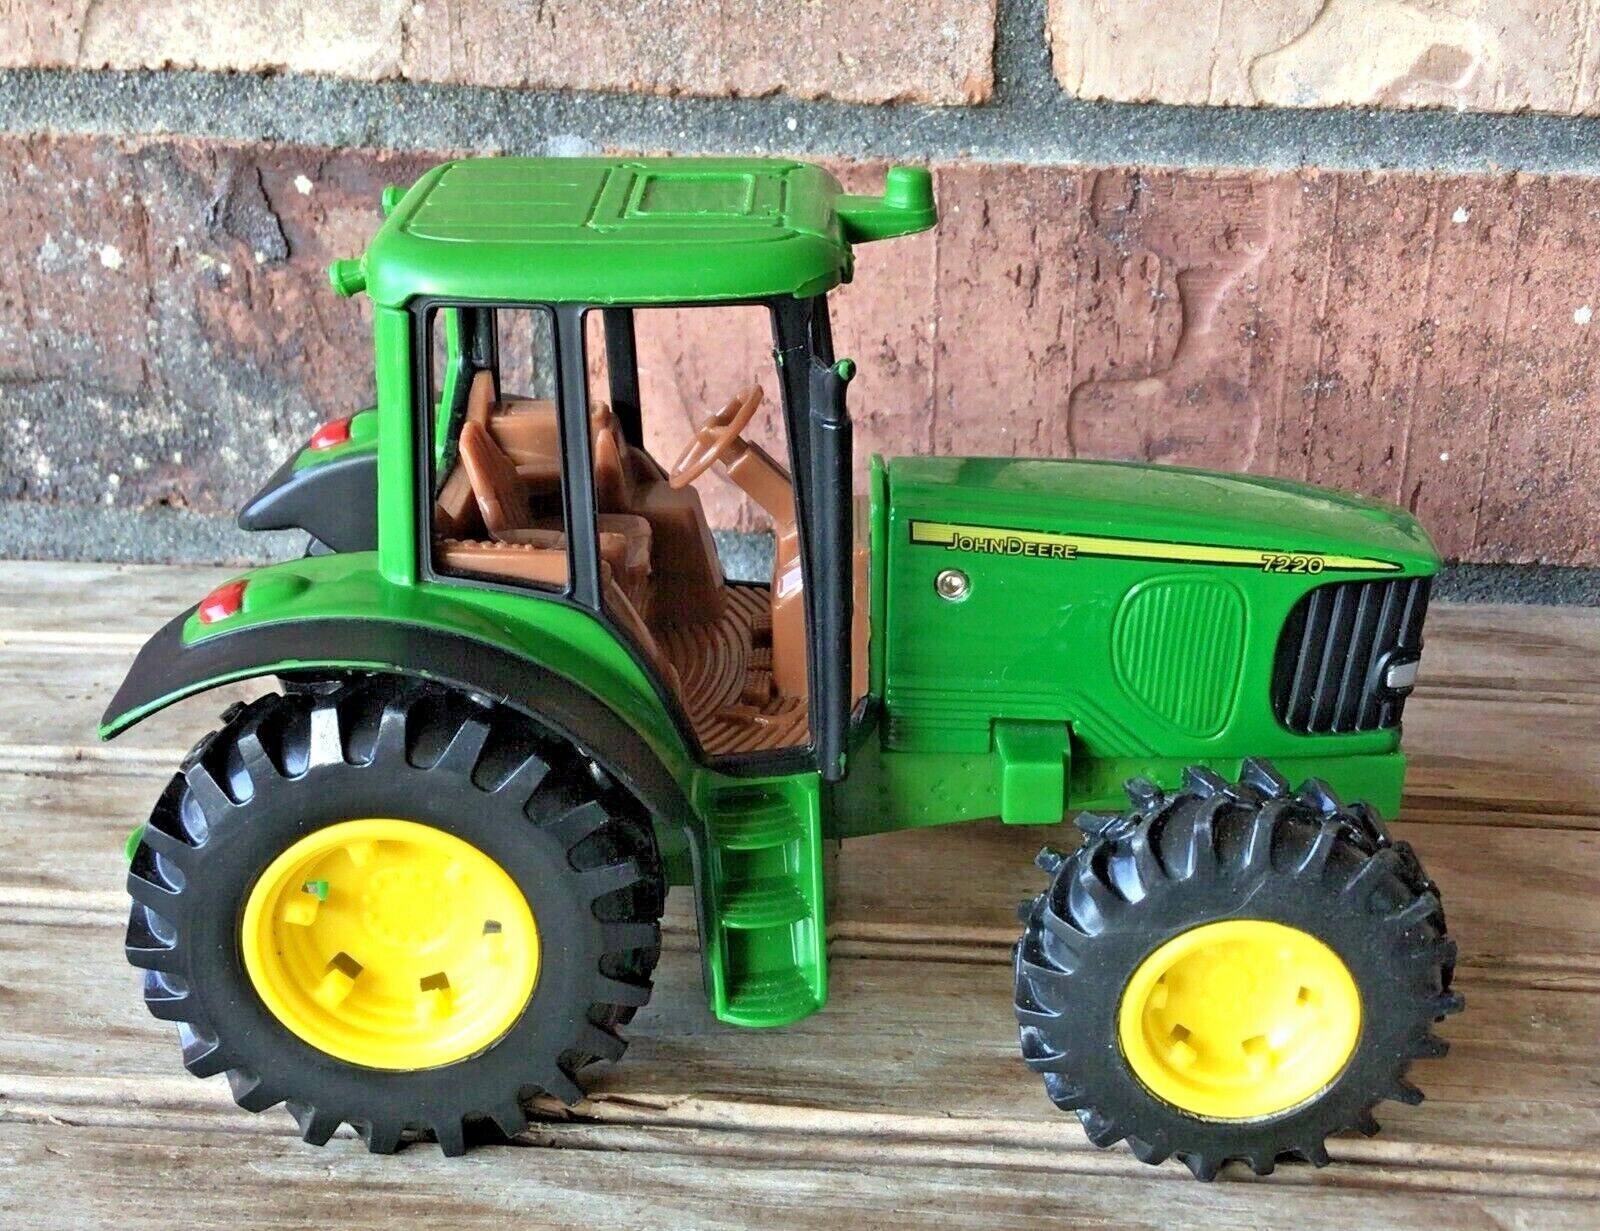 John Deere Licensed Product Tractor Toy 7220 Die Cast & Plastic 6" Green Yellow